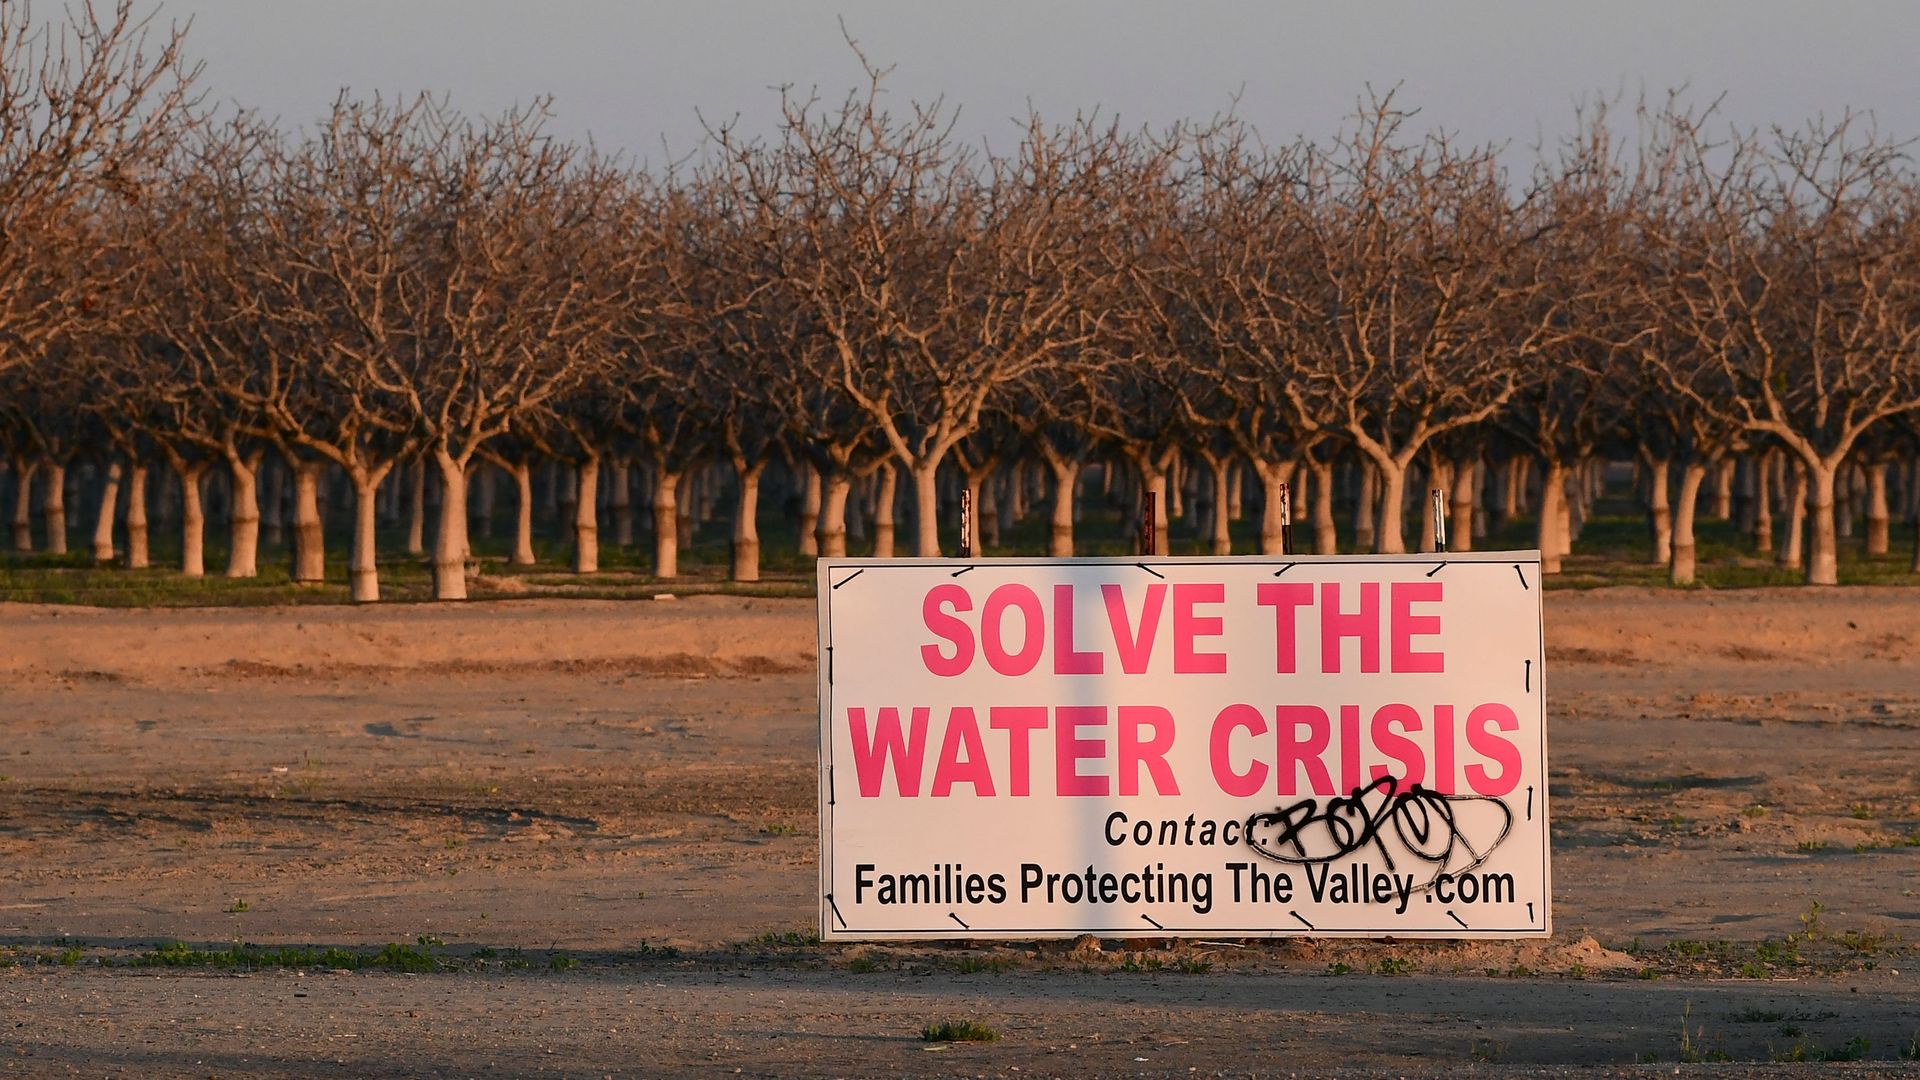 A sign calls for solving California's water crisis on the outskirts of Buttonwillow in California's Kern County on April 2, 2021